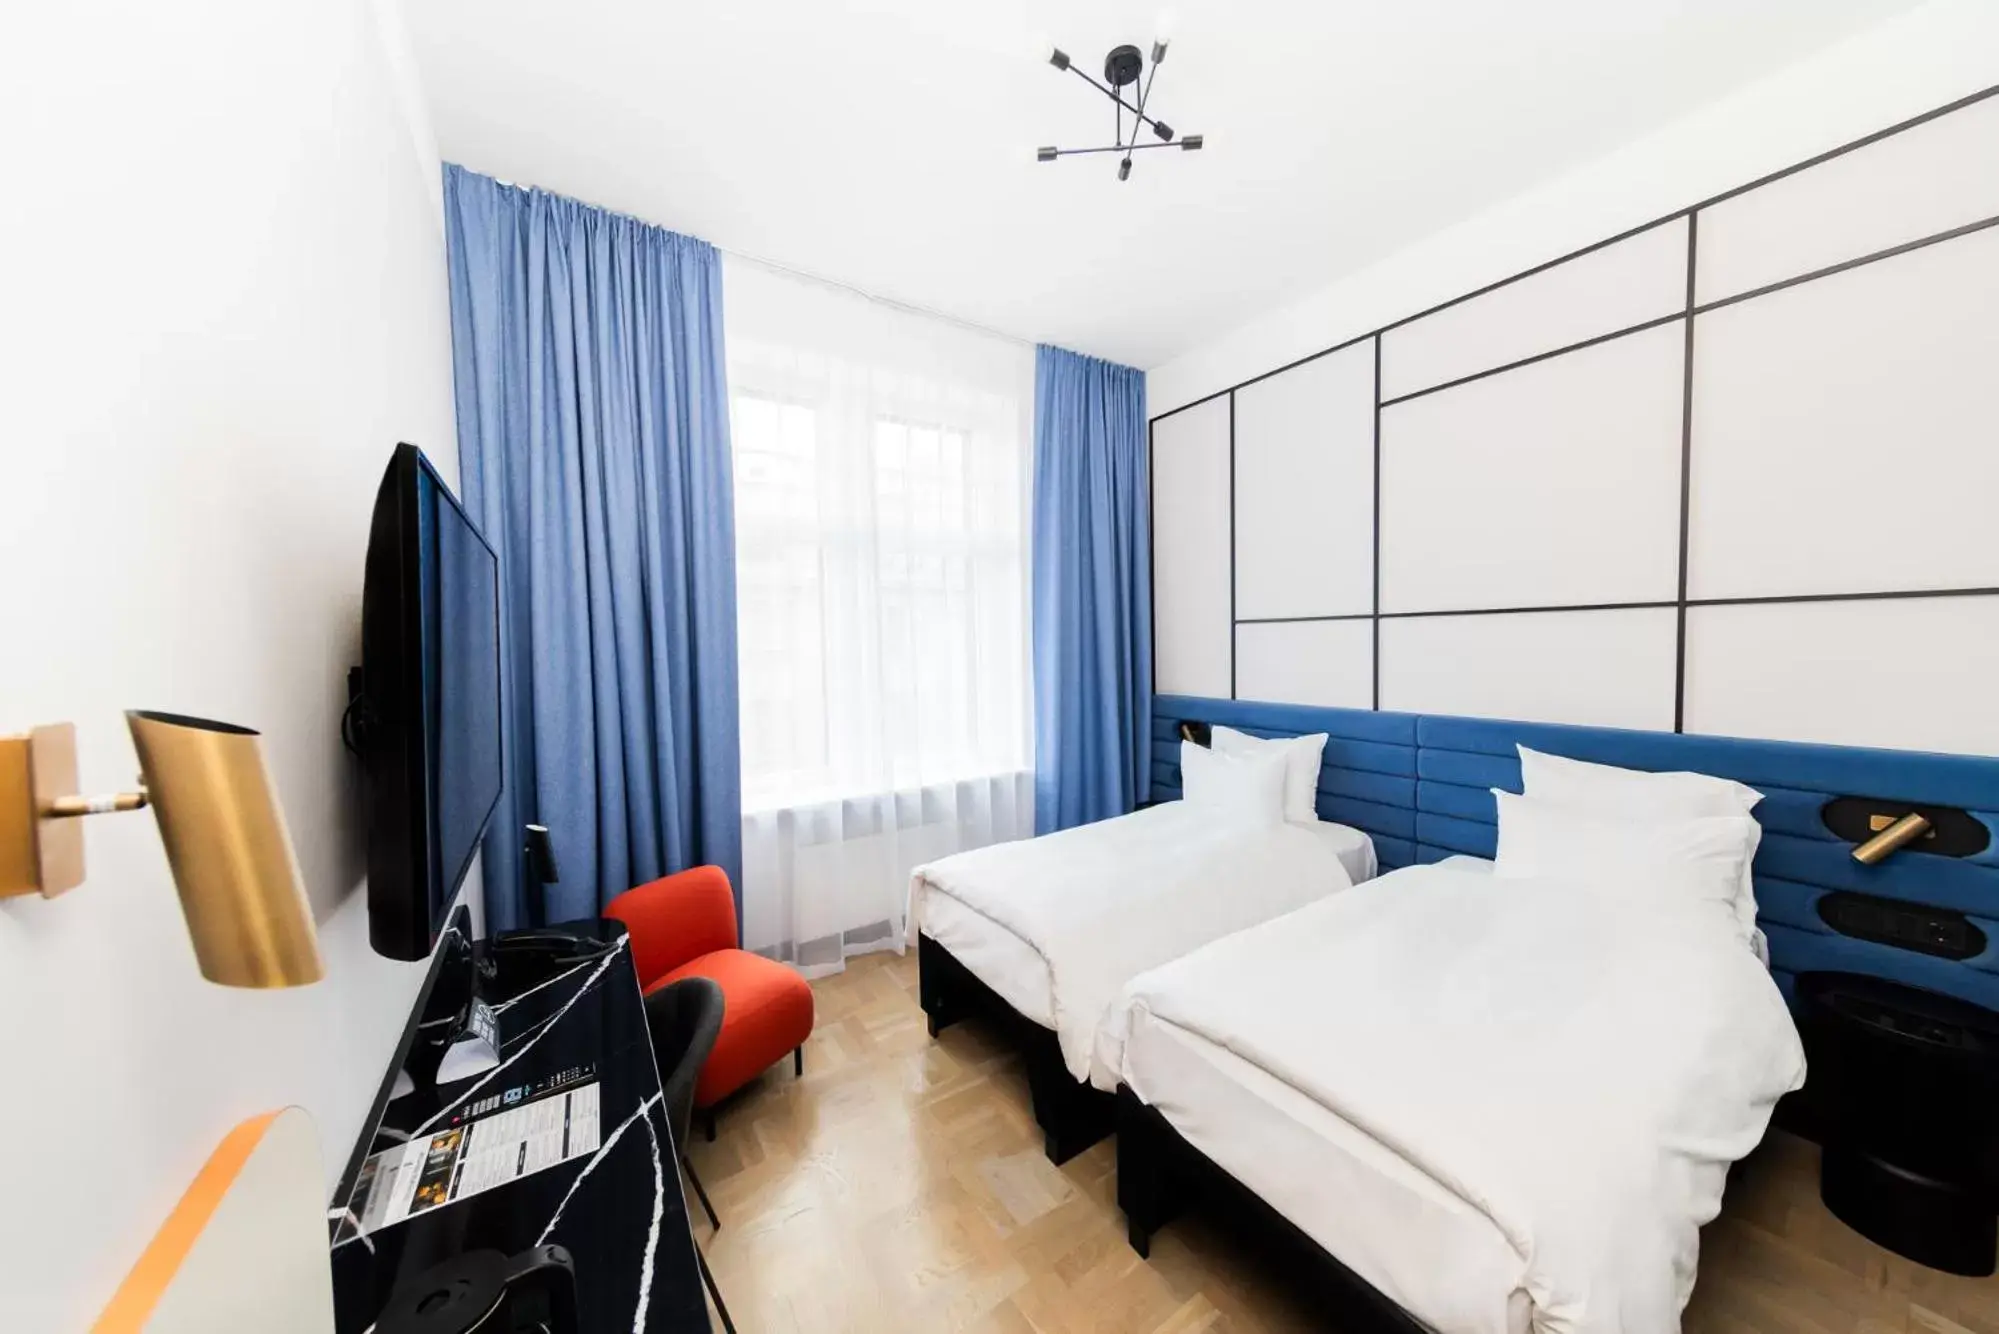 TV and multimedia in Hotel Valdemars Riga managed by Accor